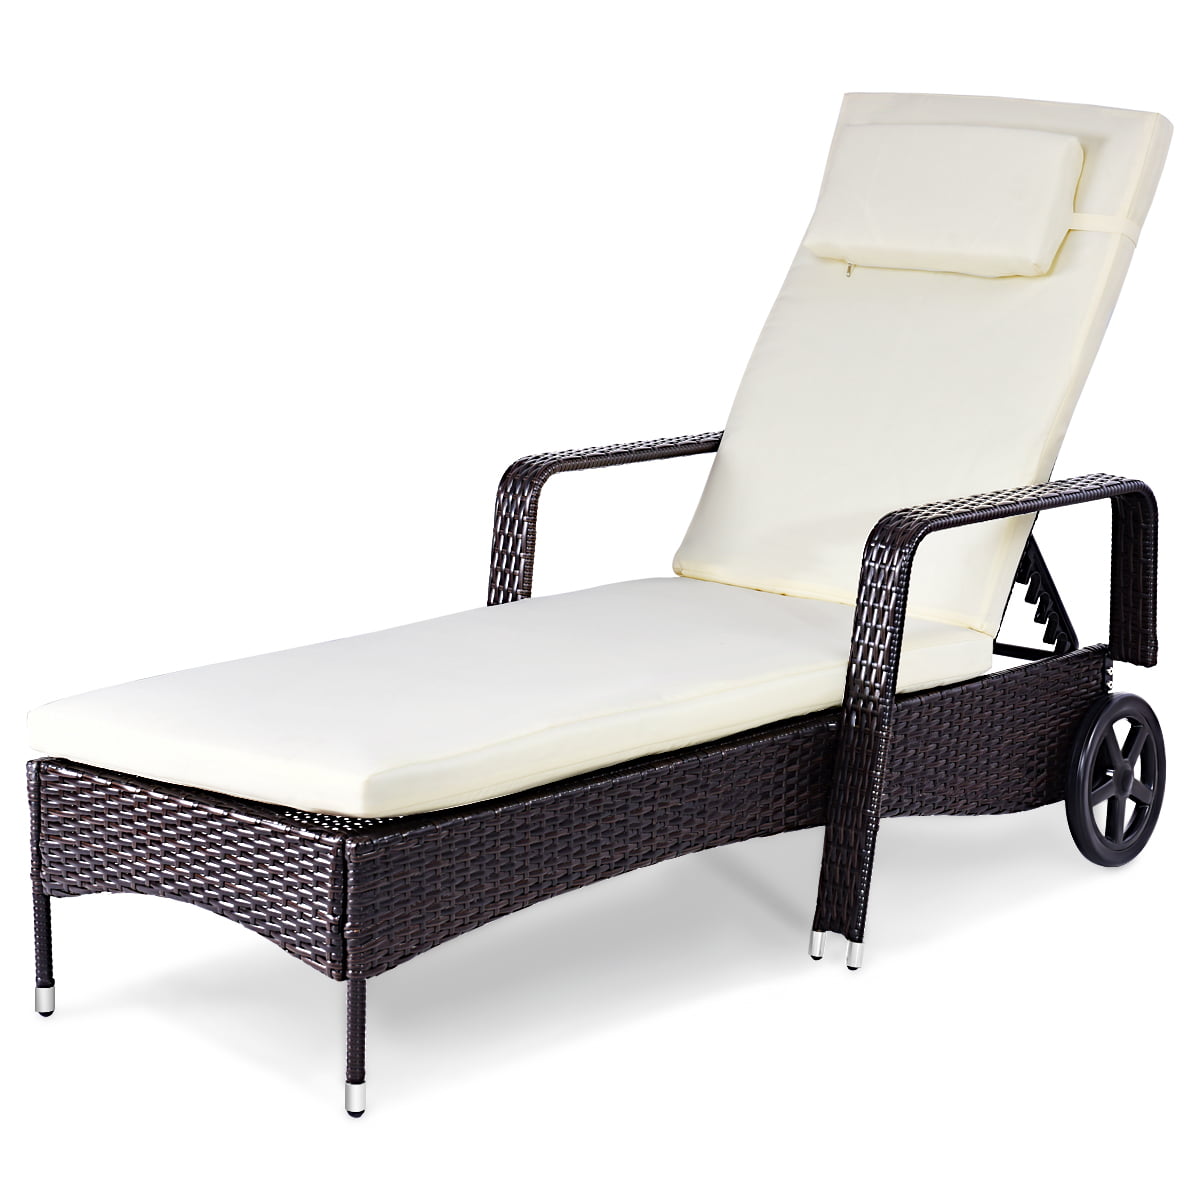 Costway Outdoor Chaise Lounge Chair Recliner Cushioned Patio Furniture